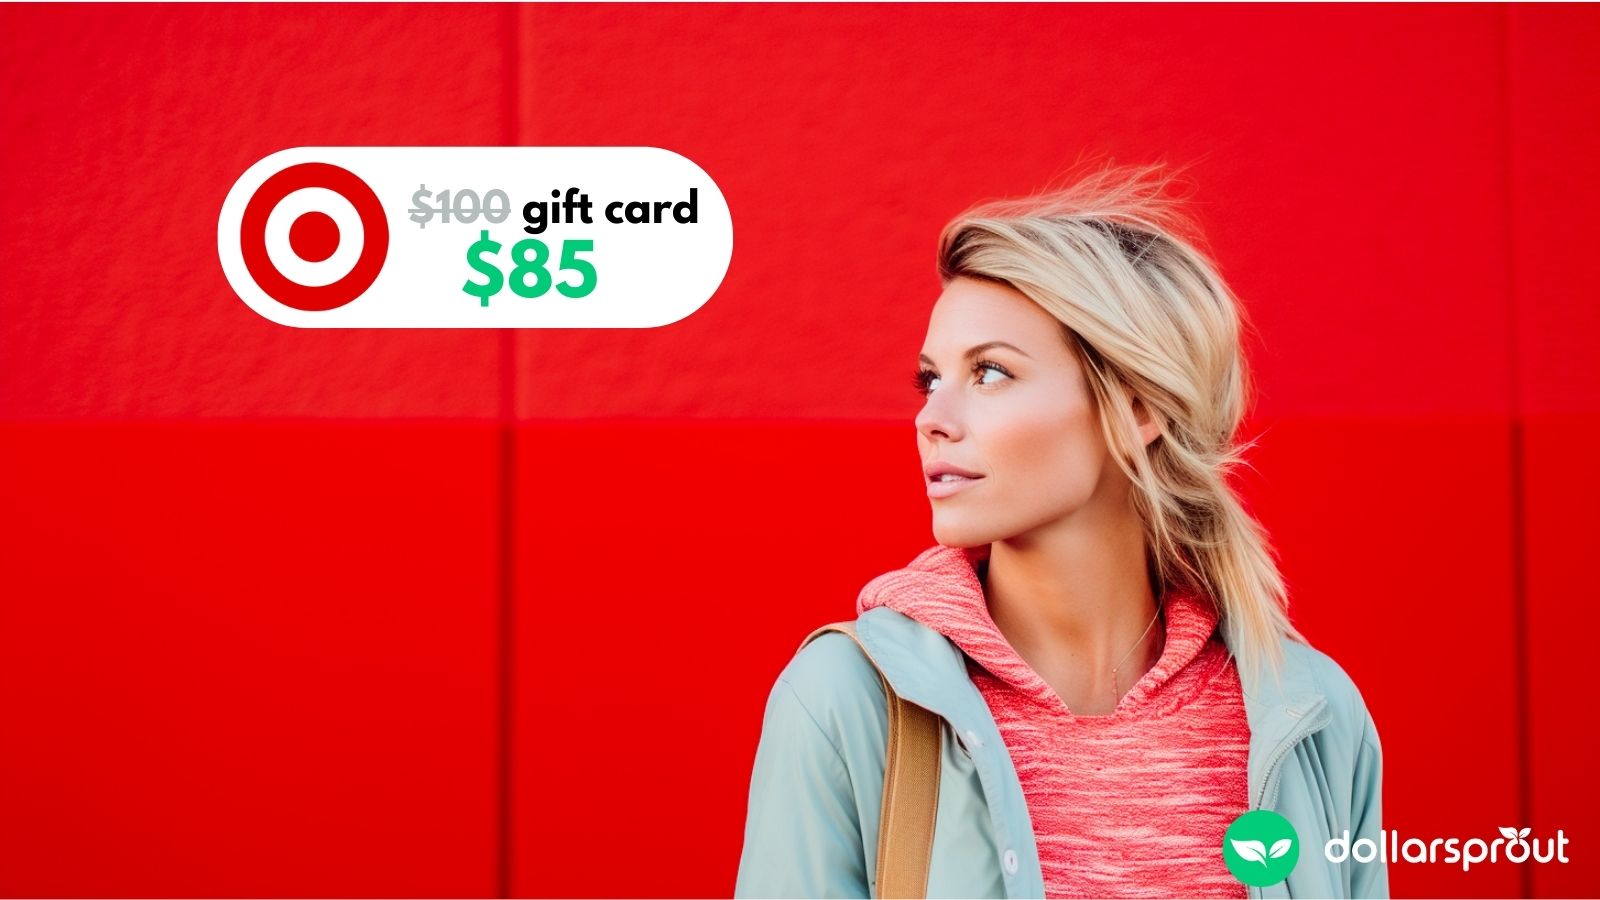 Buy your Apple Store & iTunes Gift Card at a Discount [9% off